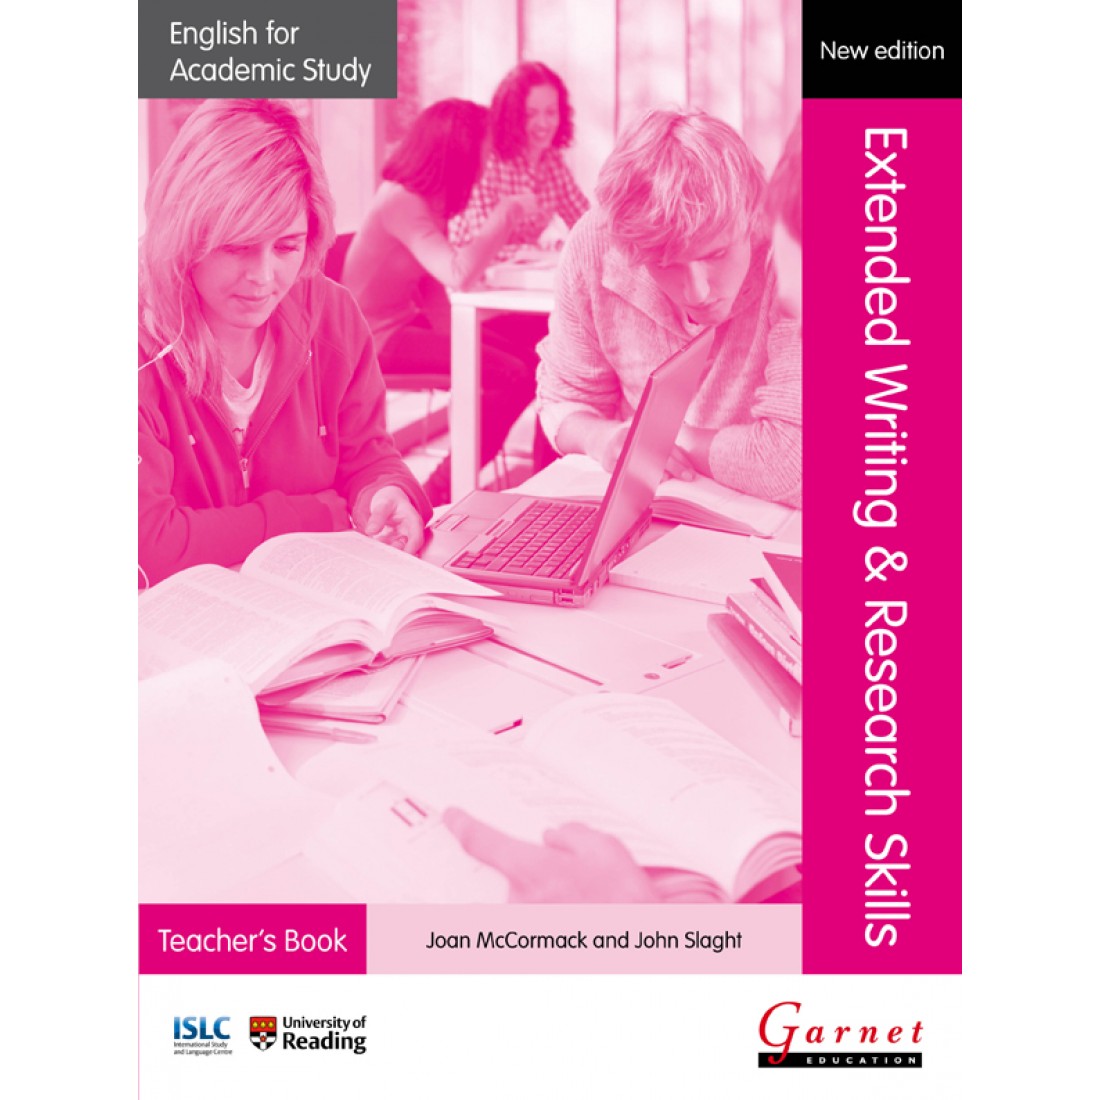 Extended　2012　–　Writing　Academic　NEW!　Skills　Edition　Study:　Research　English　Book　for　Teacher's